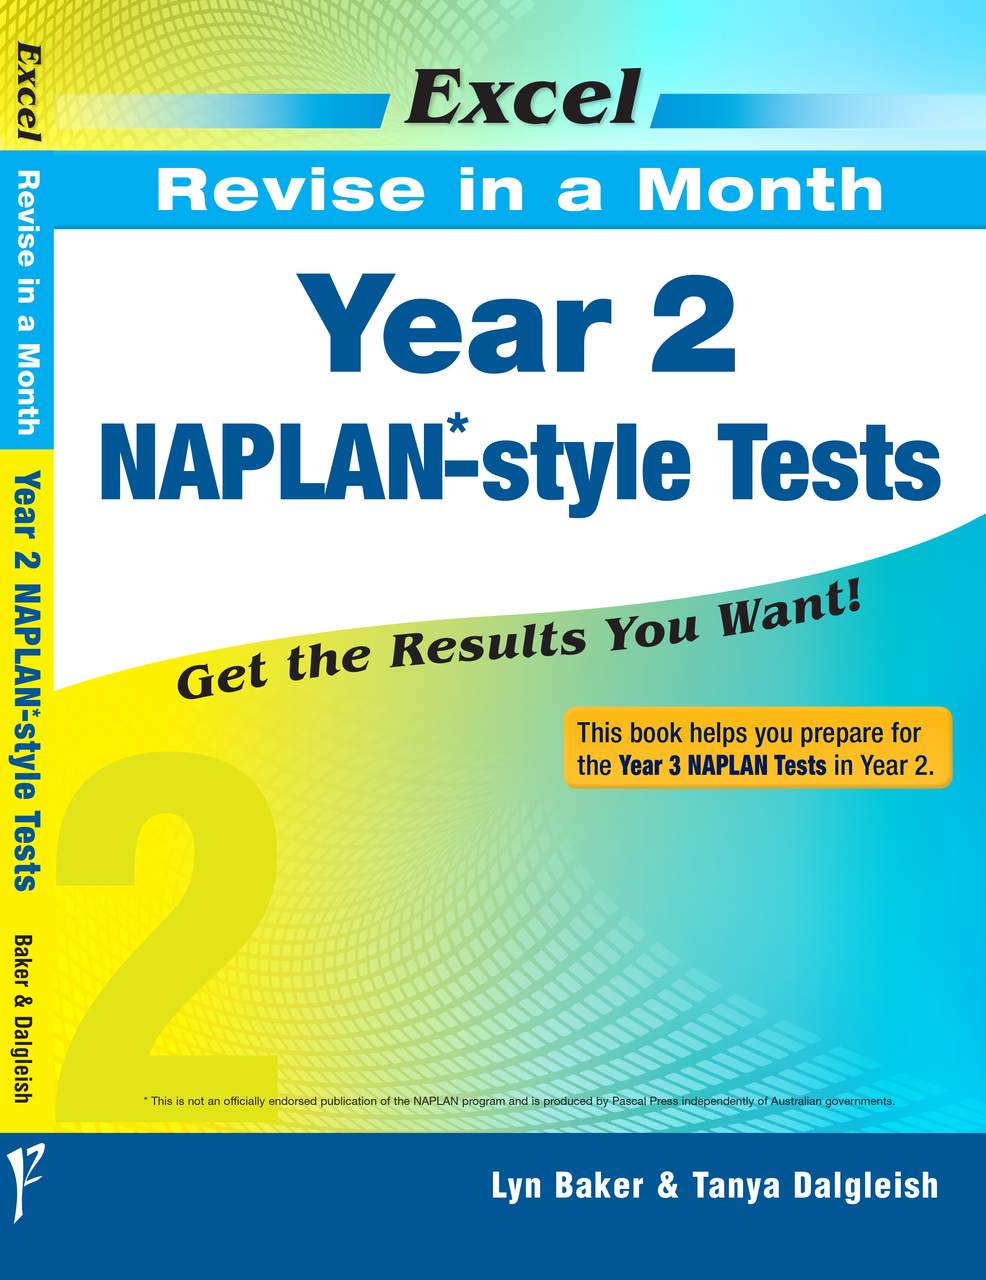 EXCEL REVISE IN A MONTH - YEAR 2 NAPLAN*-STYLE TESTS